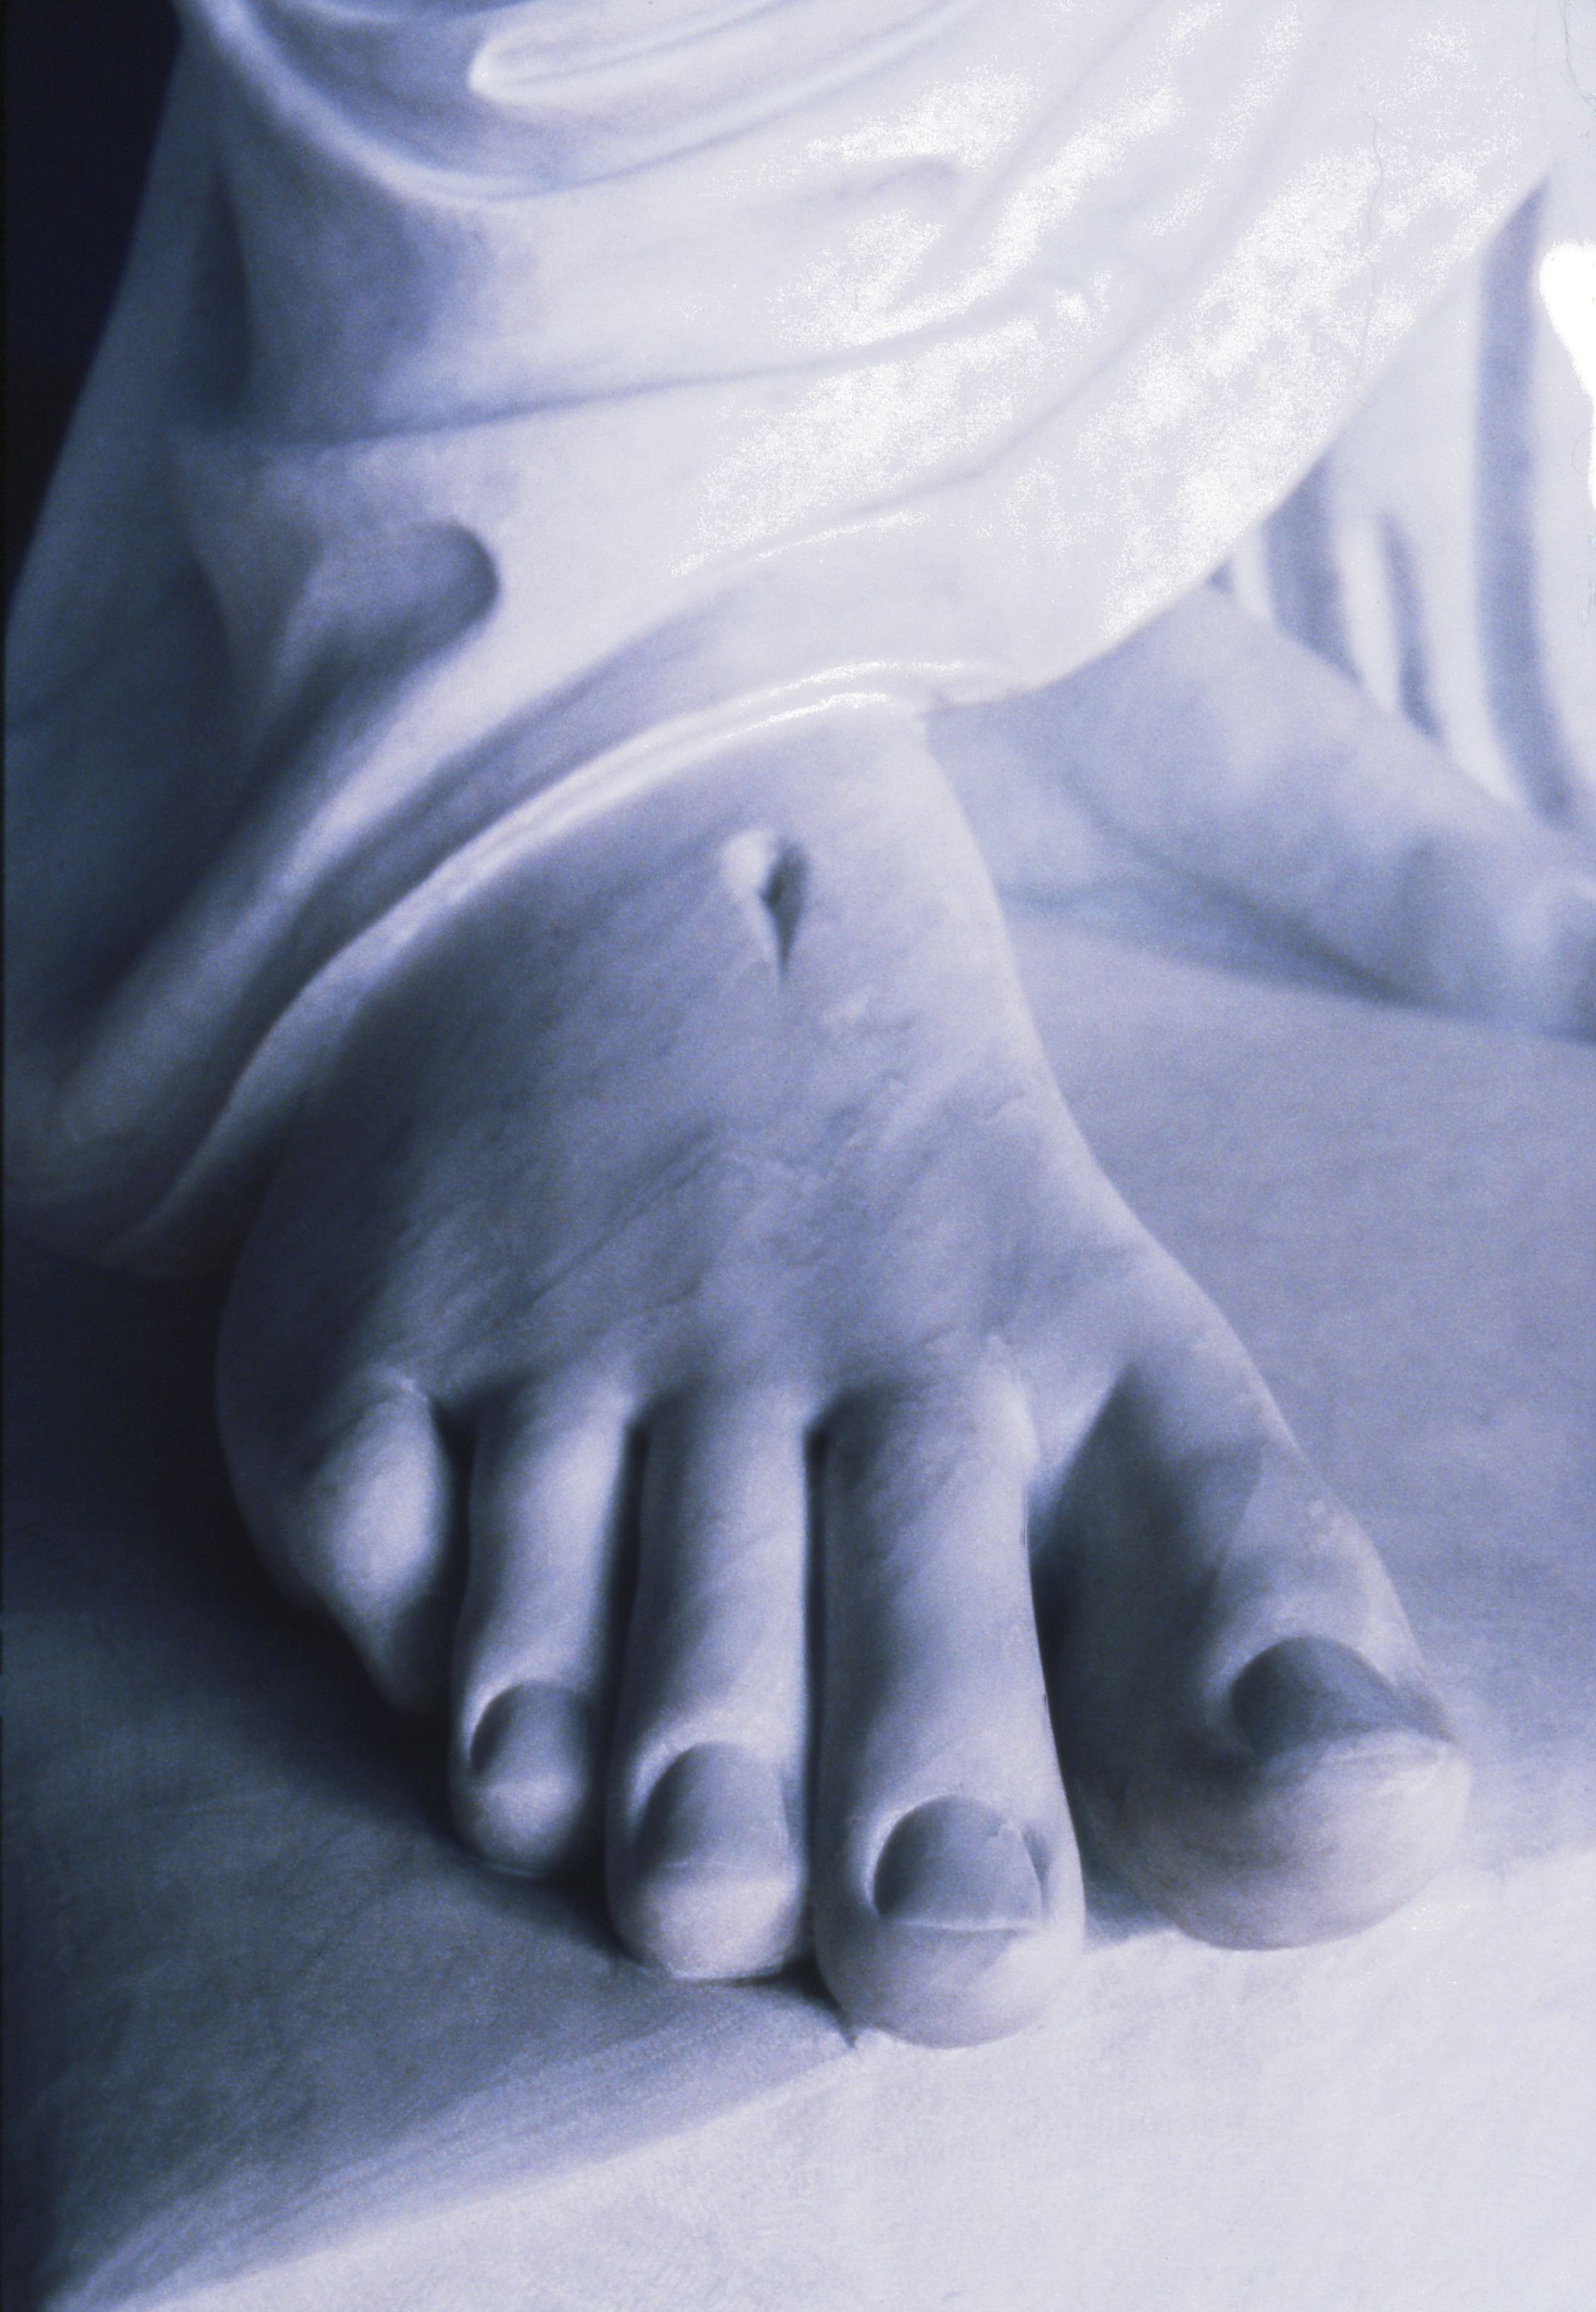 A detail of the foot of the replica of Bertel Thorvaldsen’s Christus statue in the Salt Lake North Visitors’ Center.